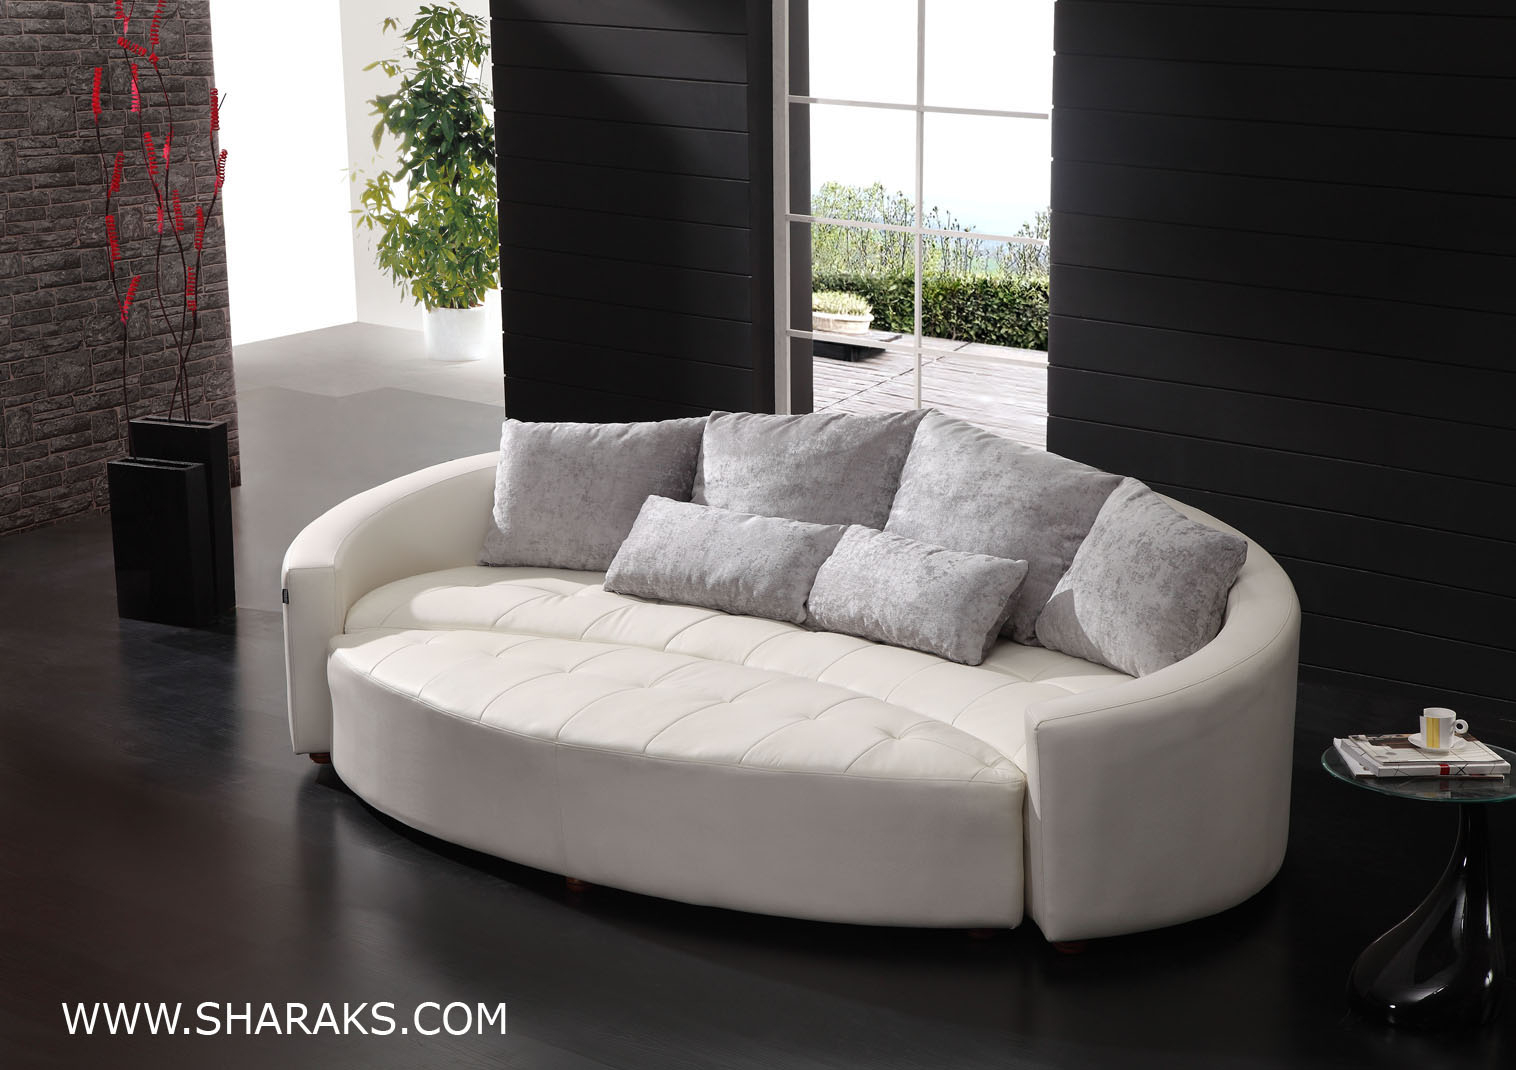 curved tufted leather sofa